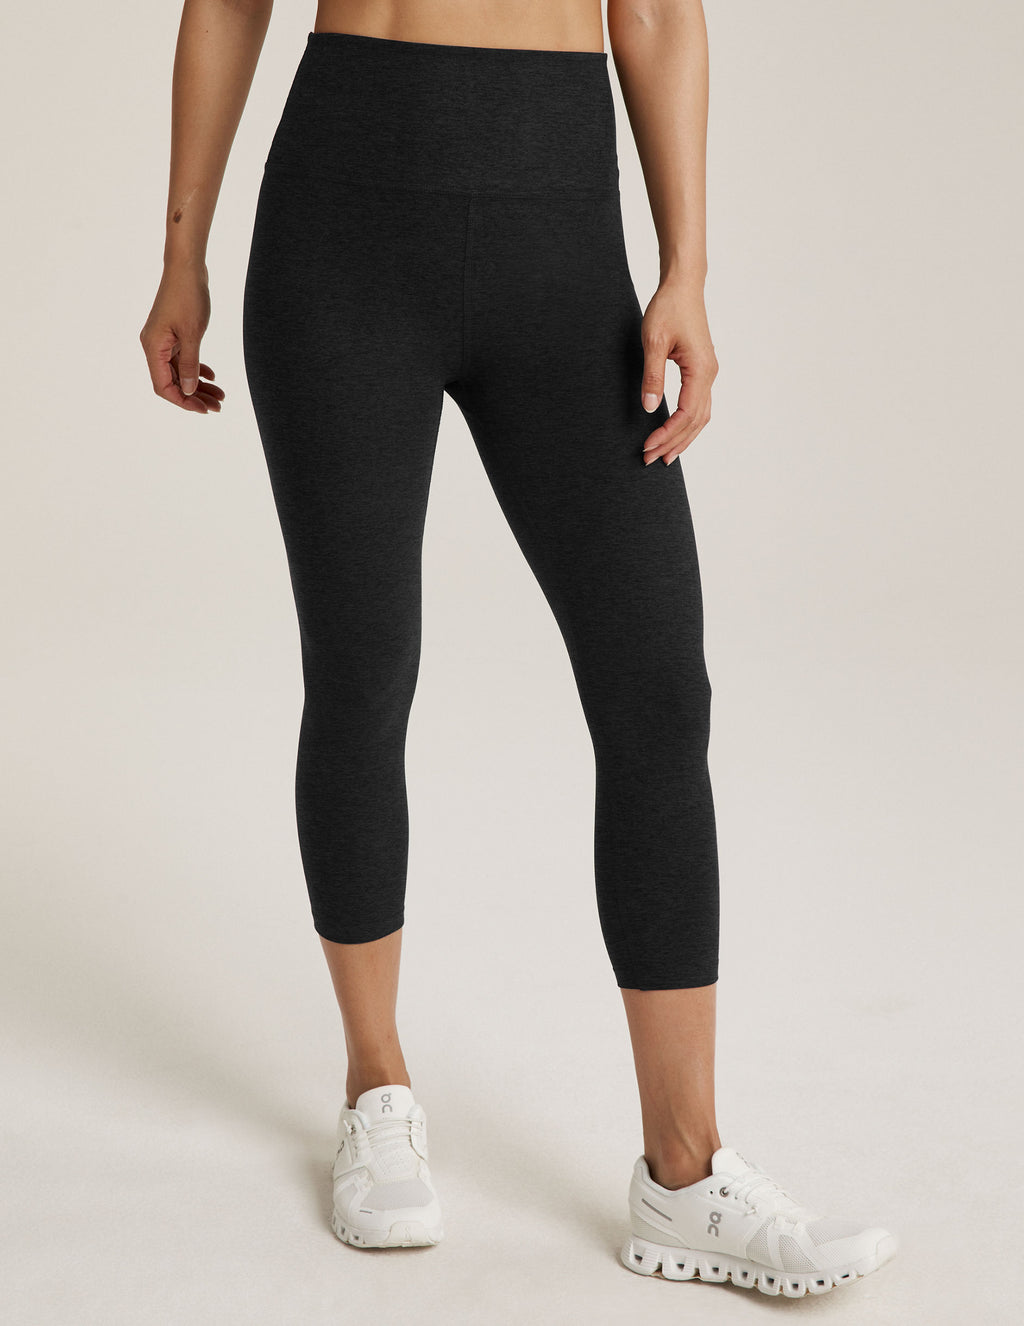 Beyond Yoga Limited Edition Soleil High Rise Black Gold Leggings Size XS -  $50 - From Julia